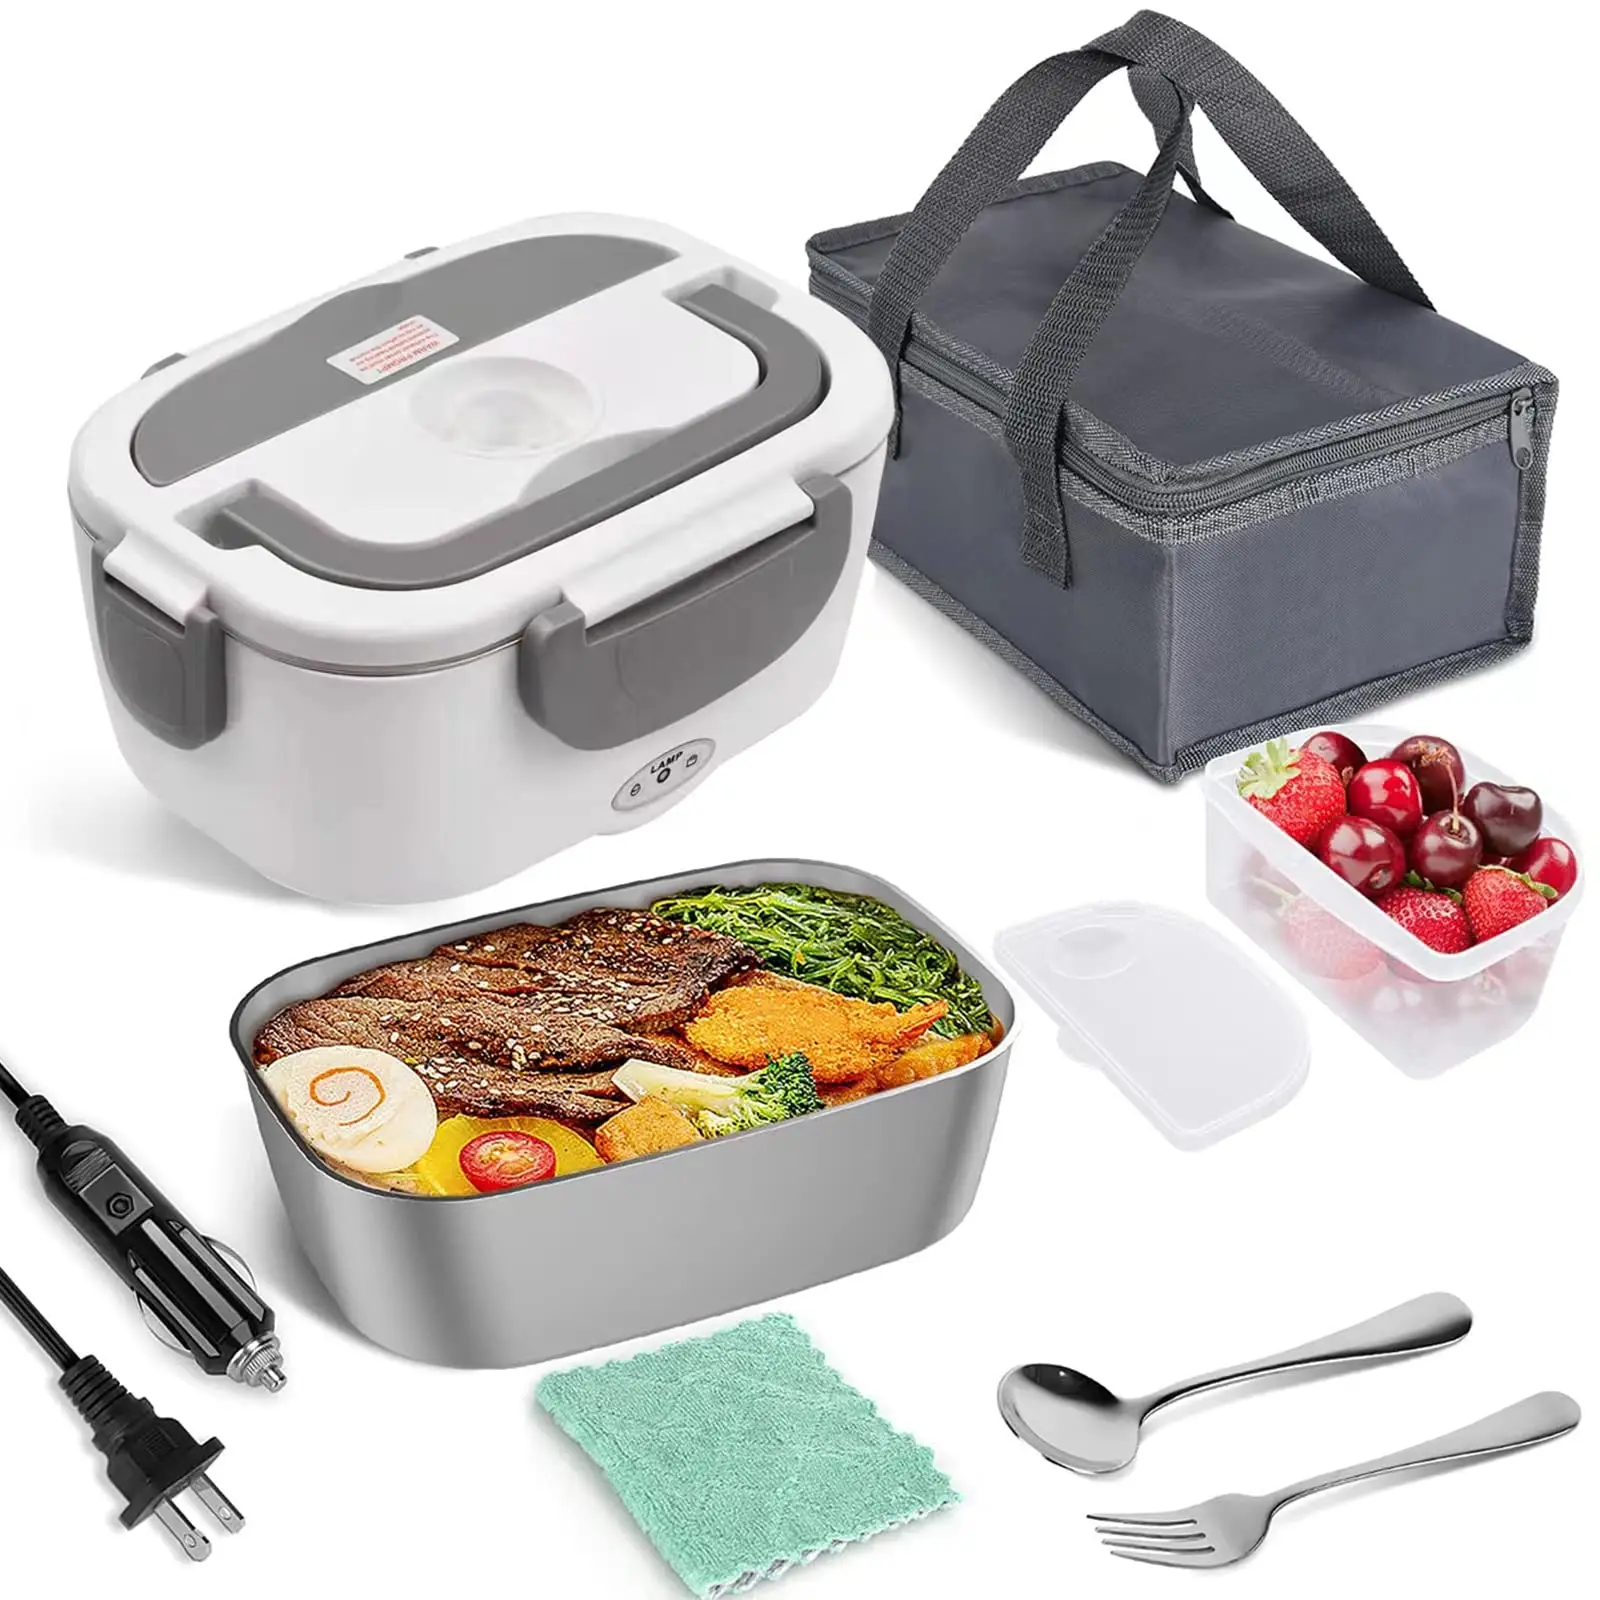 

1.8L Electric Lunch Box Food Heater High Power 60W, Luncheaze 2 in 1 Portable Heated Lunch Boxes for Adults for Car Truck